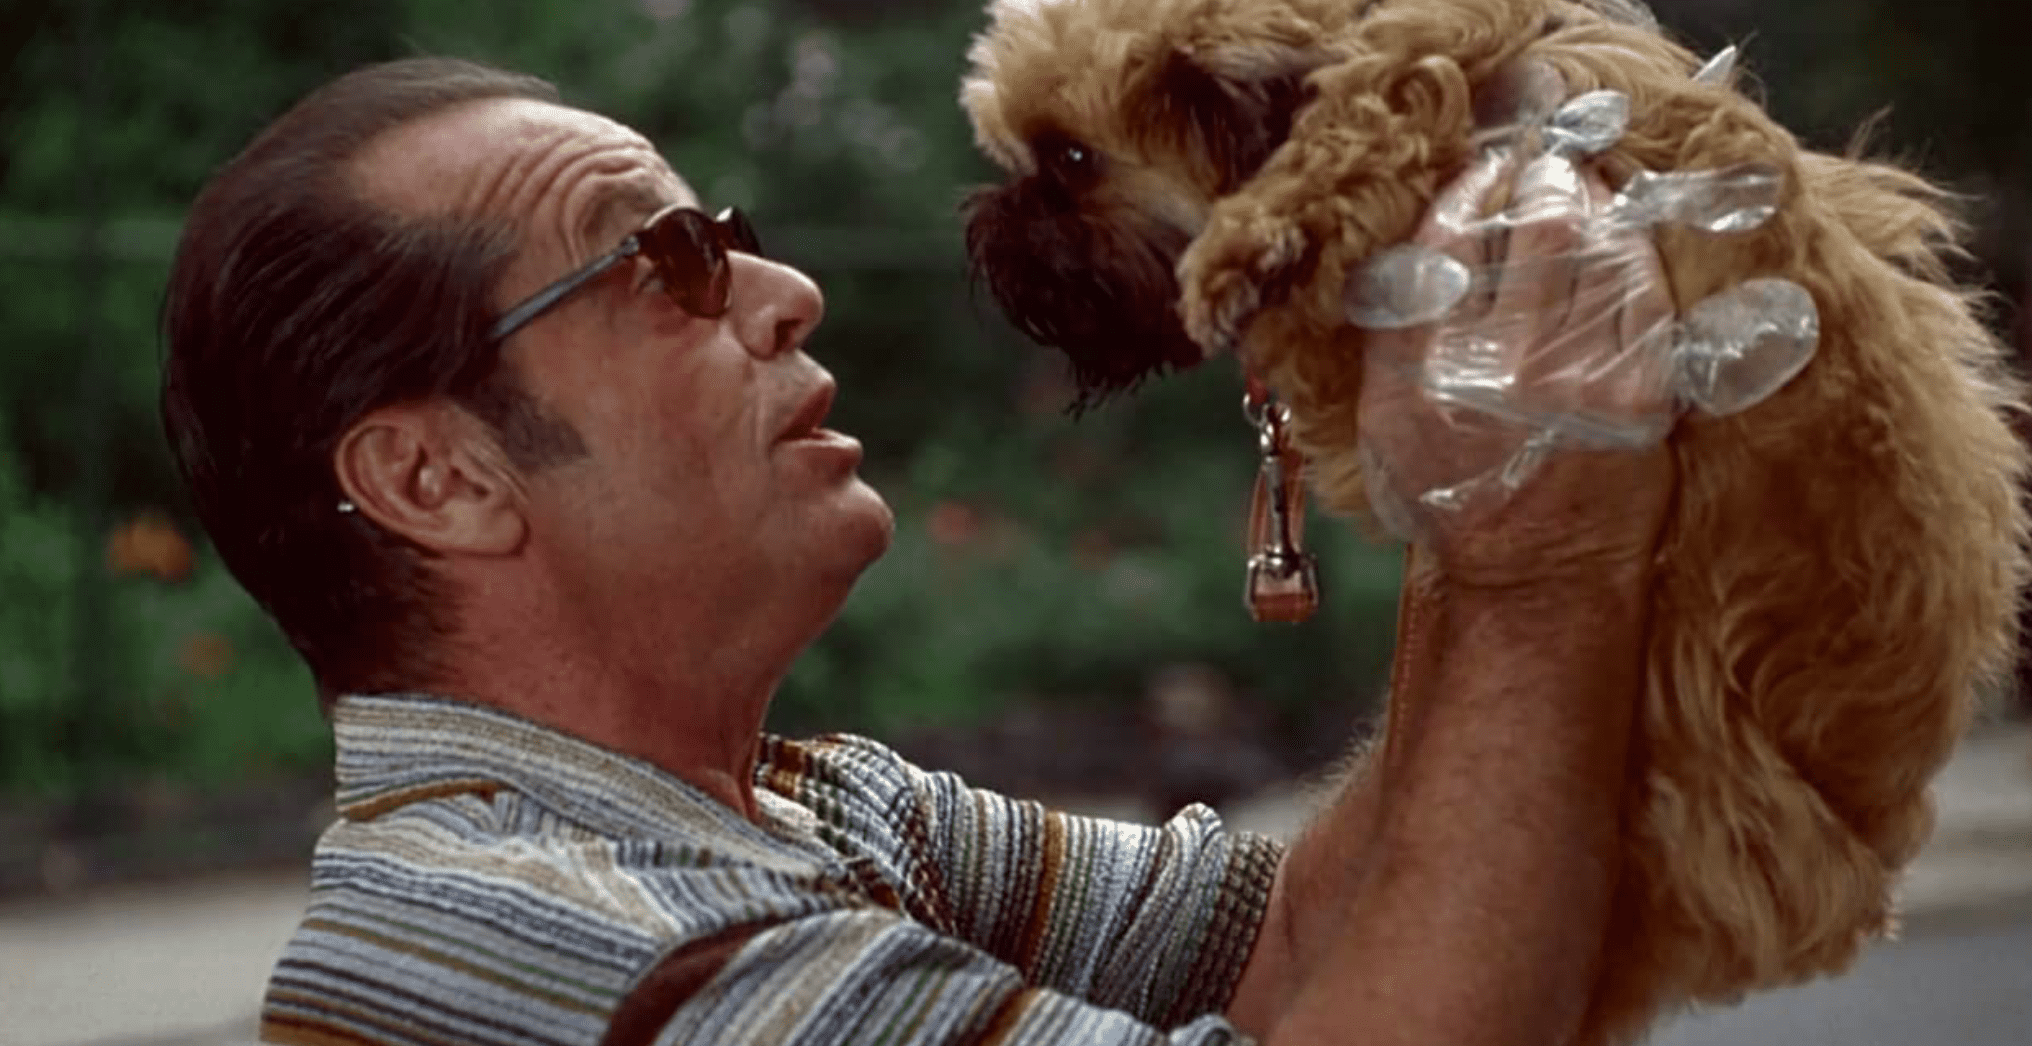 Jack Nicholson holds up a puppy in this scene from Hulu